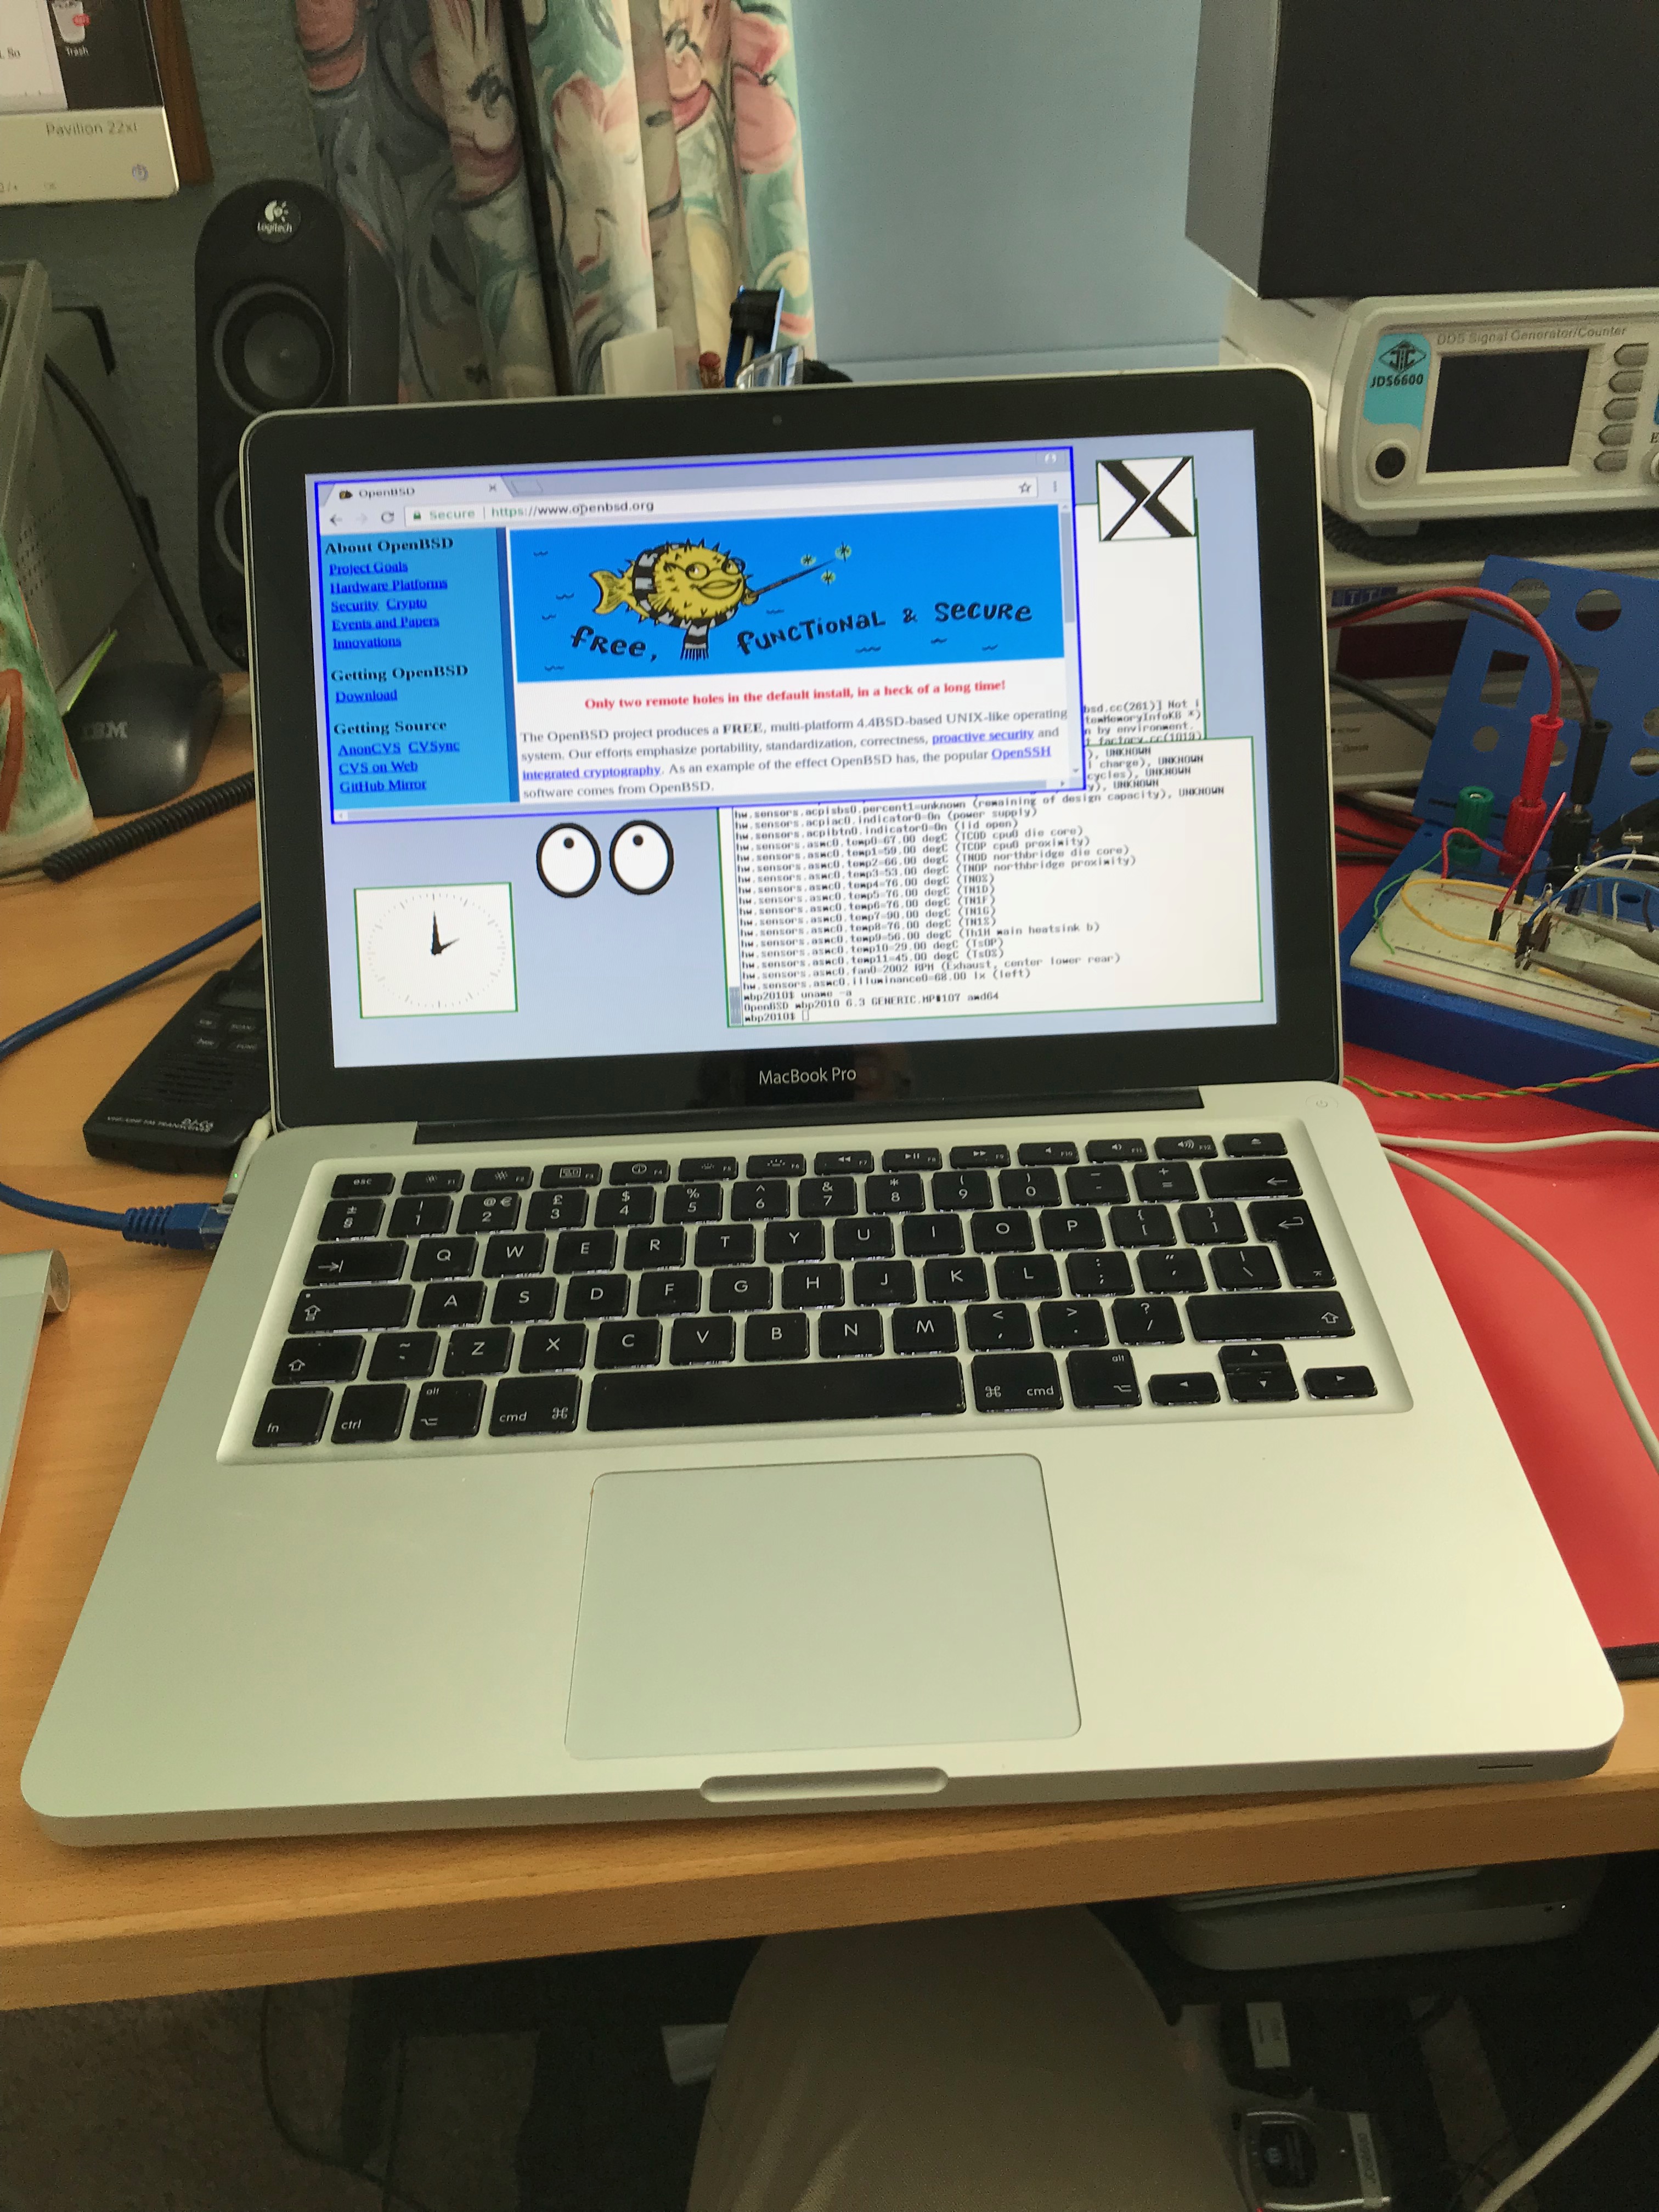 OpenBSD and MBP